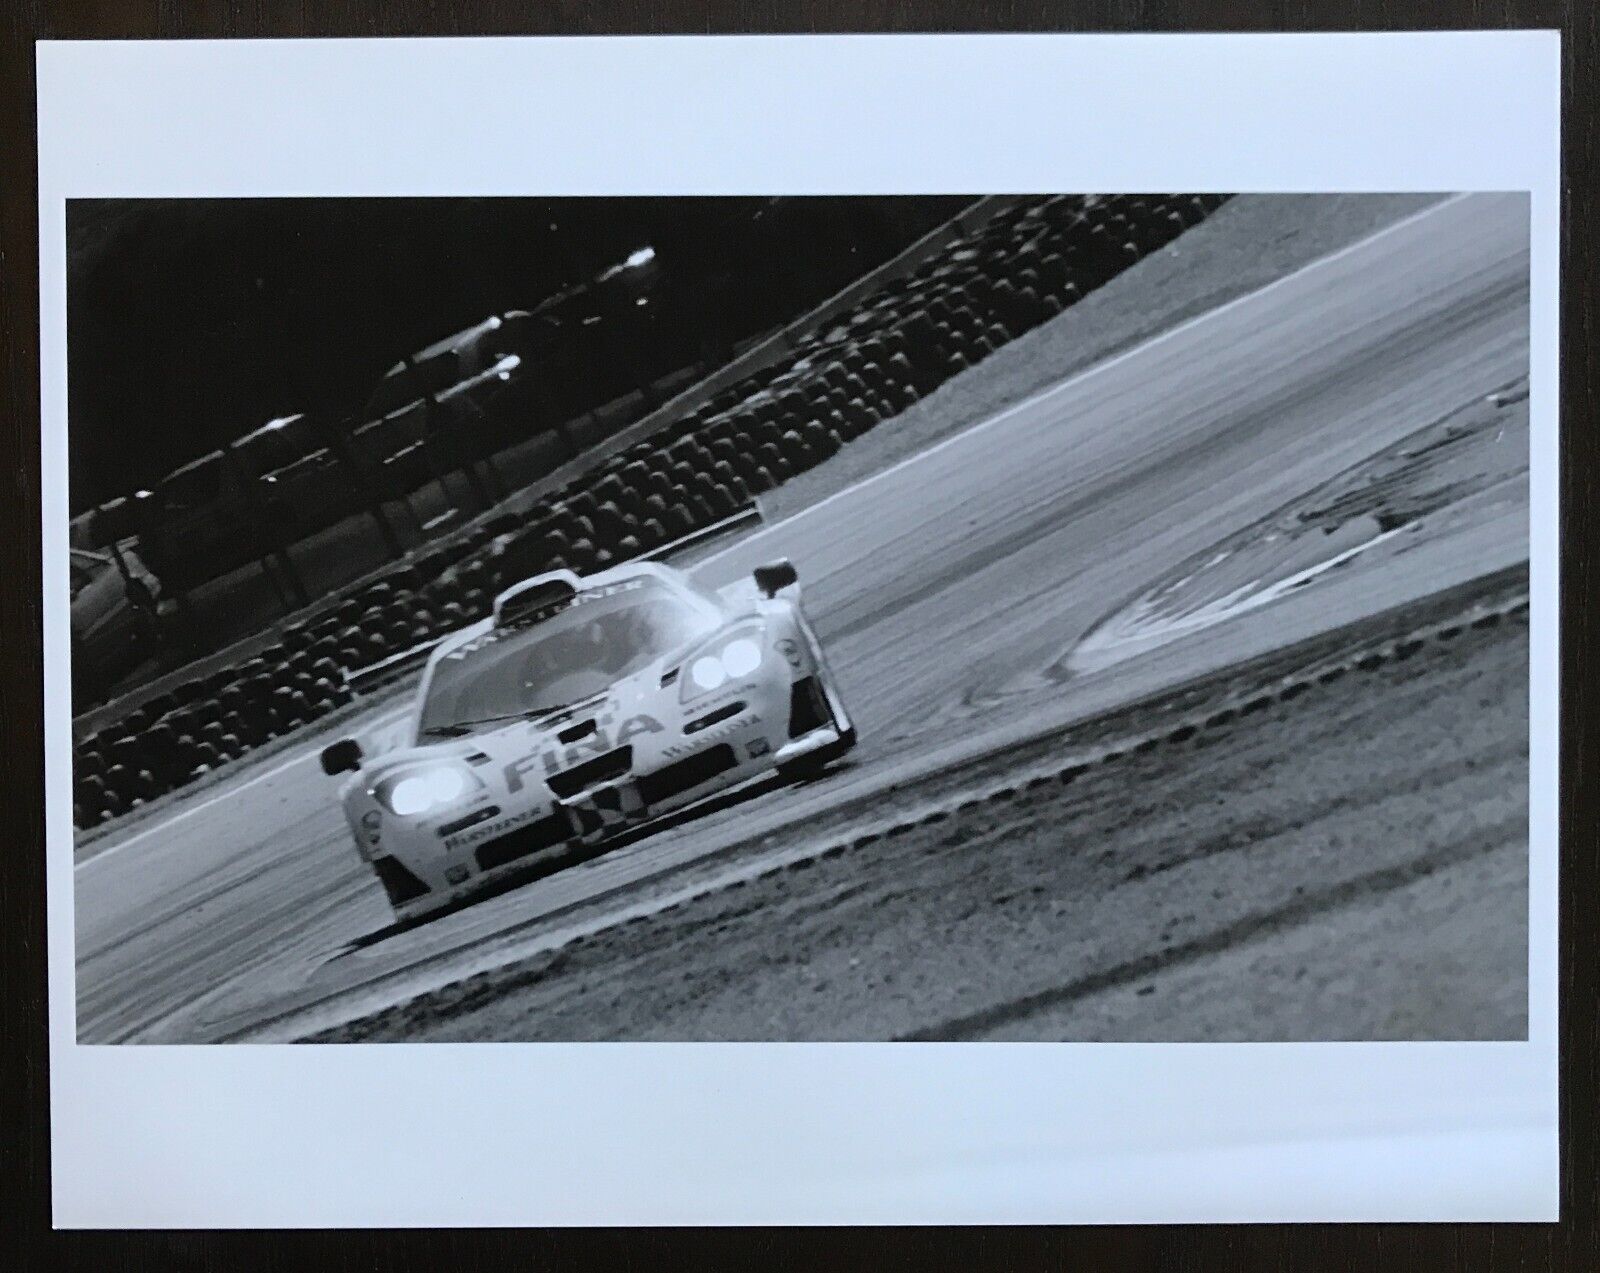 Rare BMW McLaren F1 GTR 1997 35mm Film Photo — #1 of 2 — 14x11 —Listed by Photog